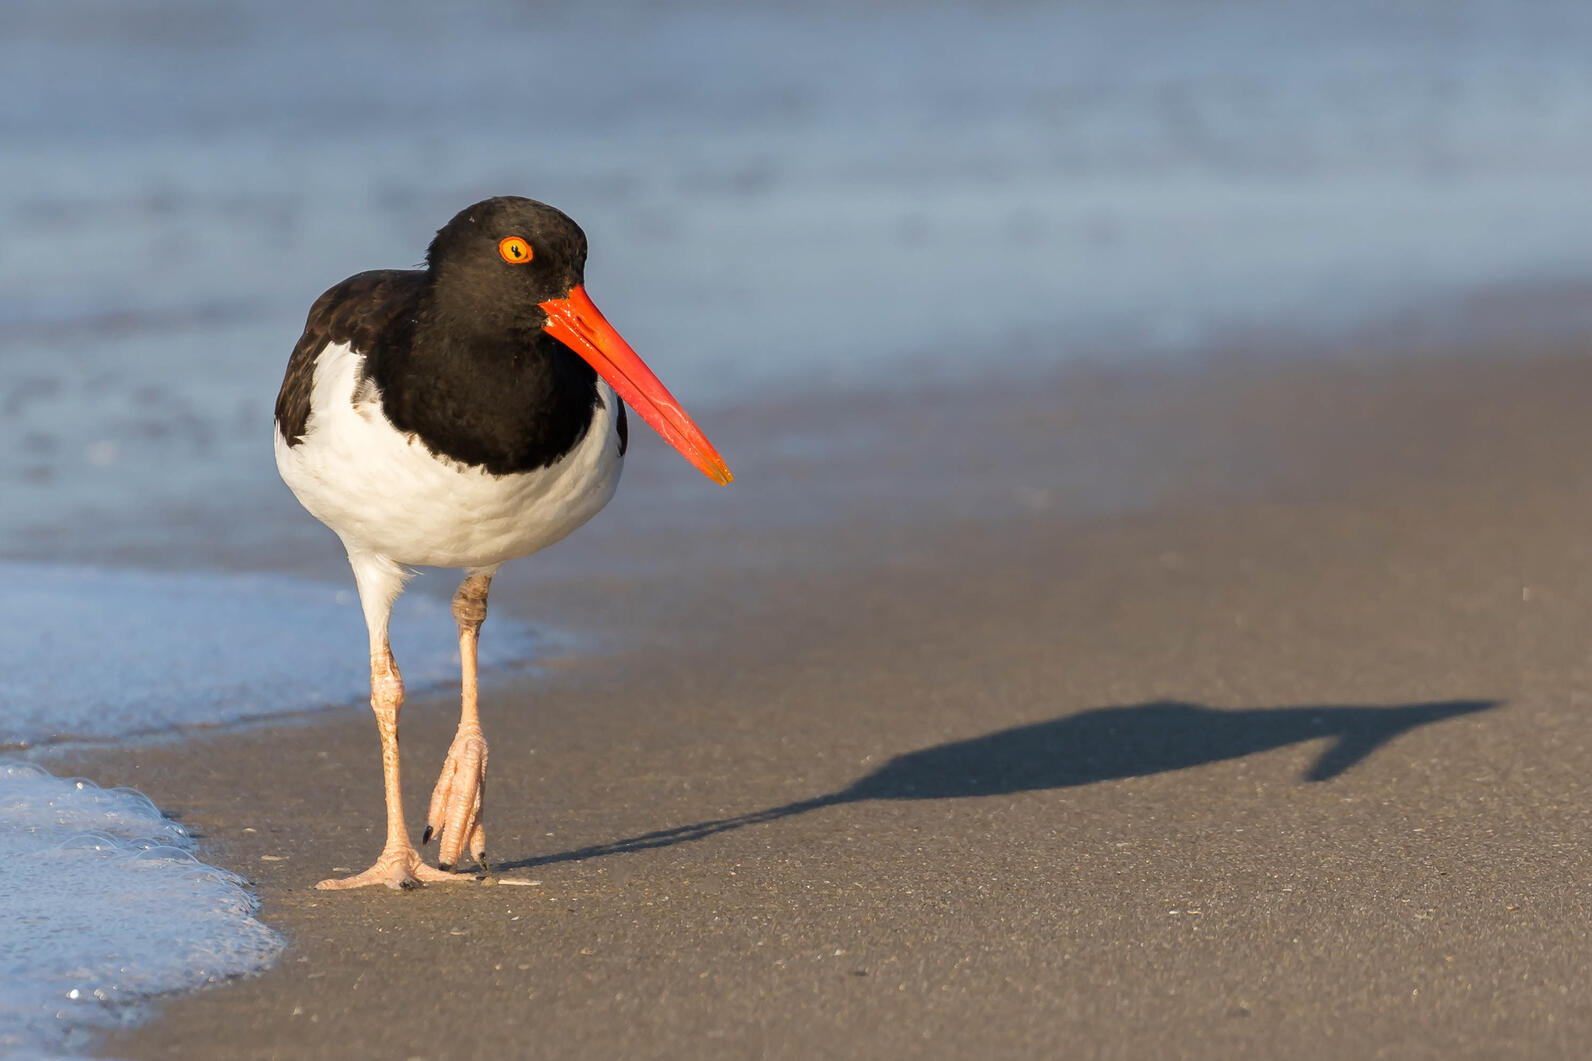 An American Oystercatcher walks on the sandy shore with the tide lapping up on the left side of the photo.